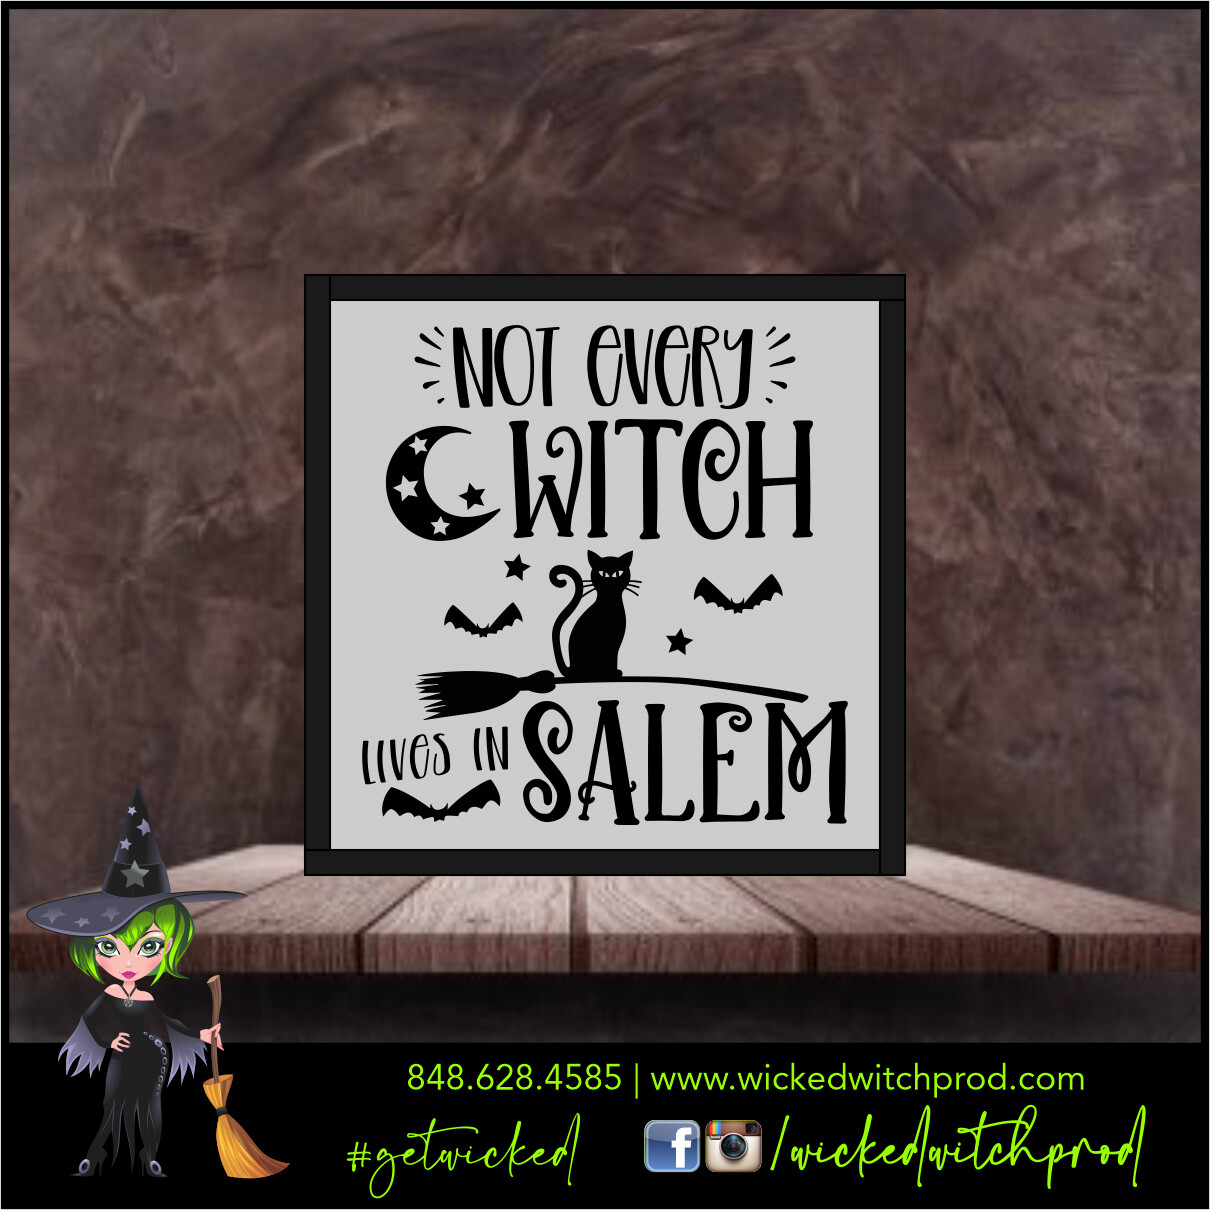 Not Every Witch Lives In Salem - Wicked Farmhouse Sign (8